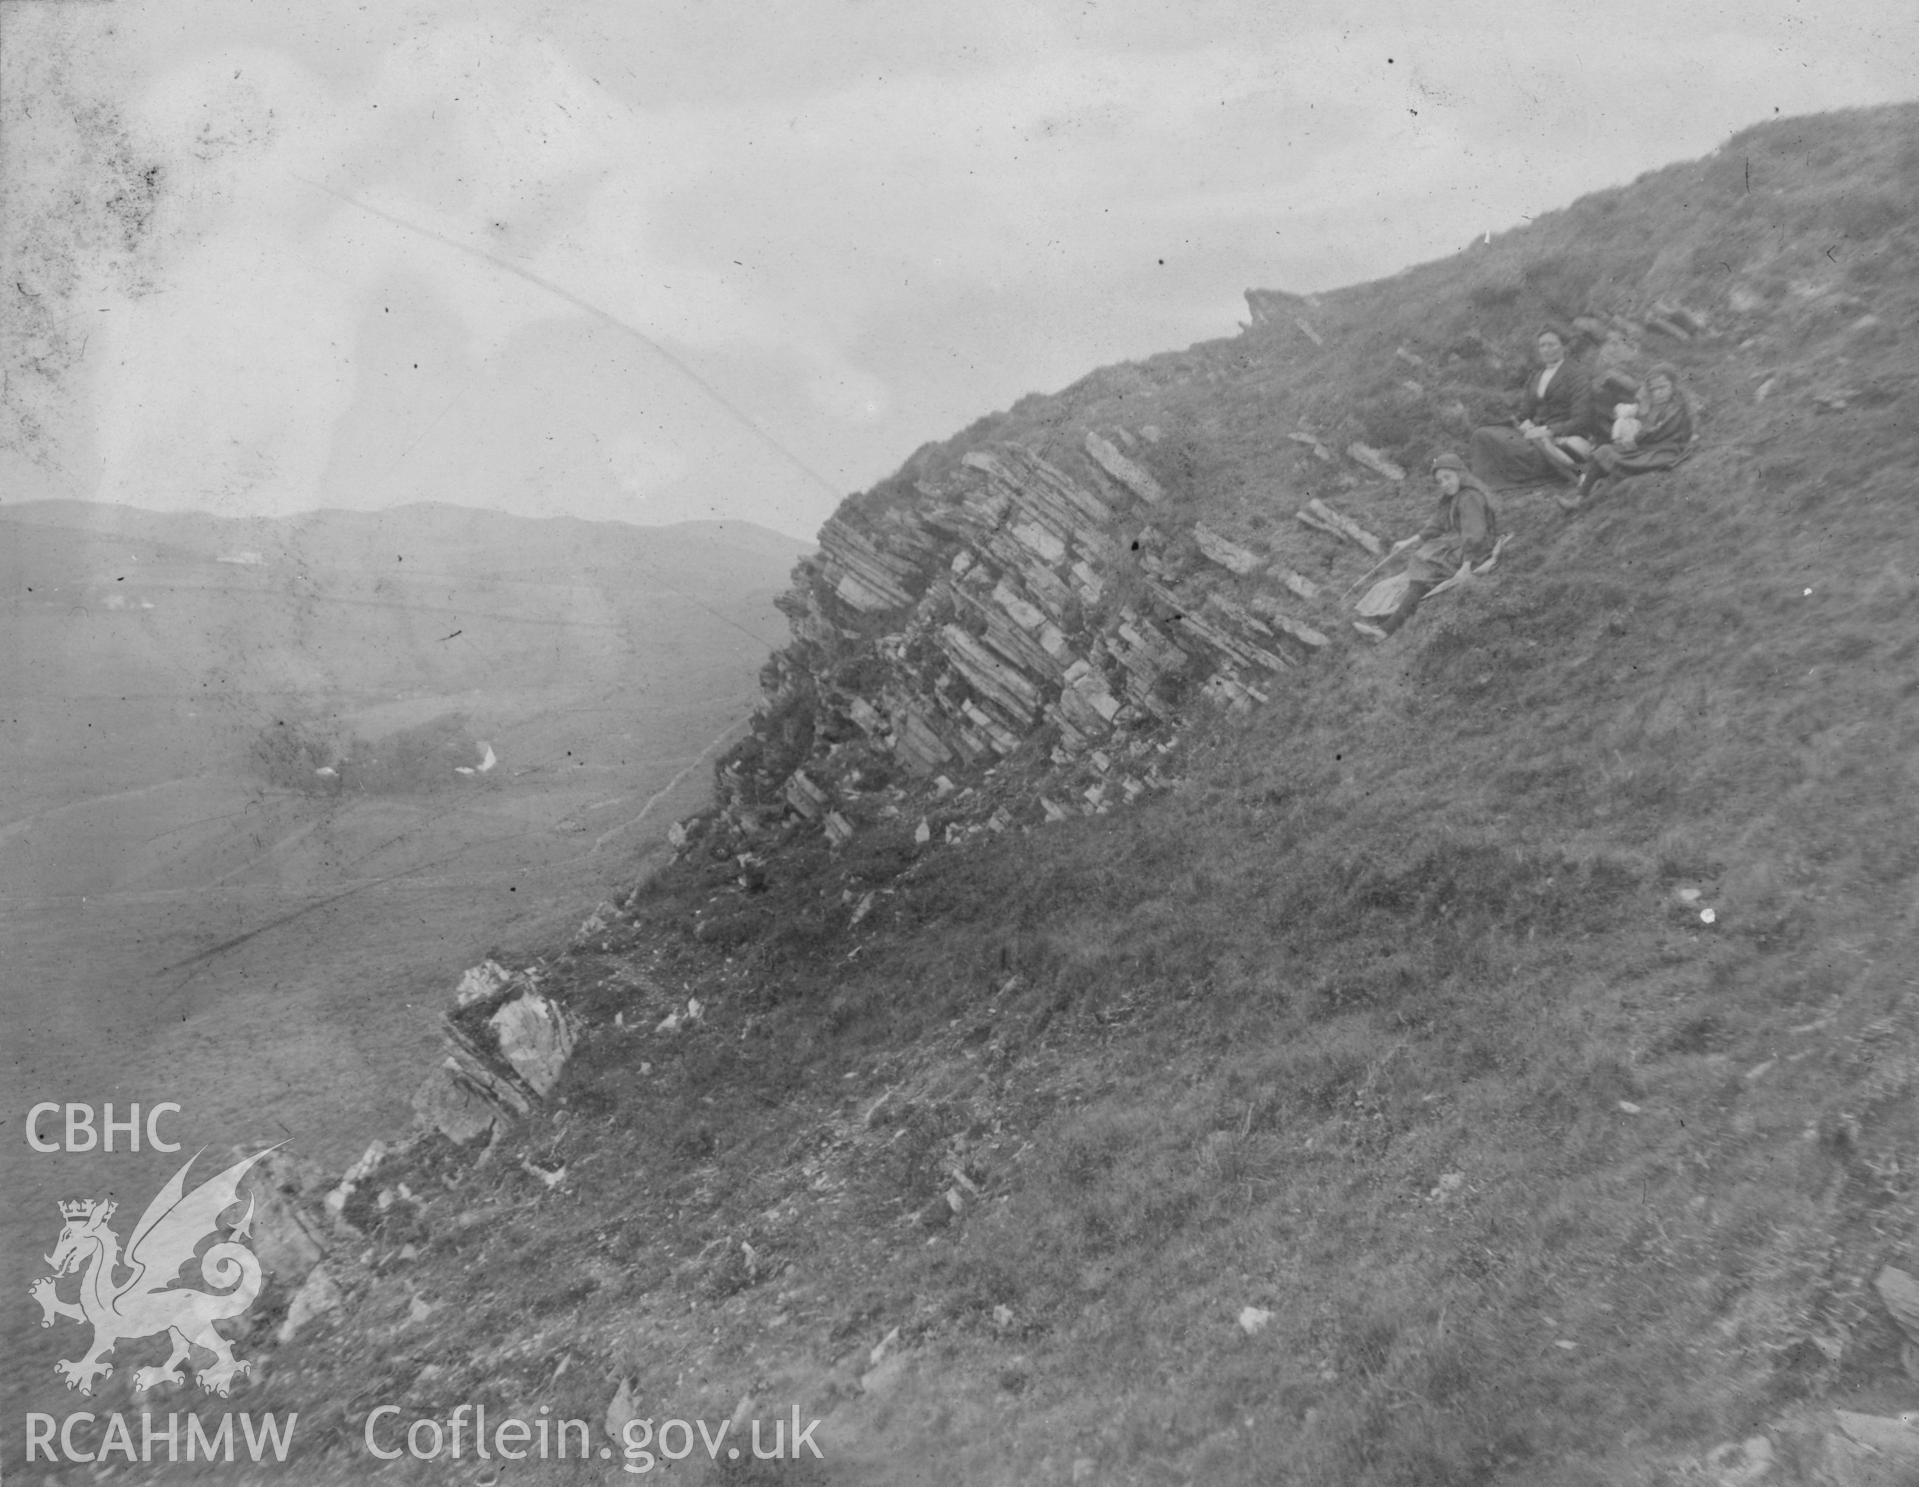 "Friwlwyd- Ystrad Meurig 1912". Photo of landscape. Digitised from a photograph album showing views of Aberystwyth and District, produced by David John Saer, school teacher of Aberystwyth. Loaned for copying by Dr Alan Chamberlain.